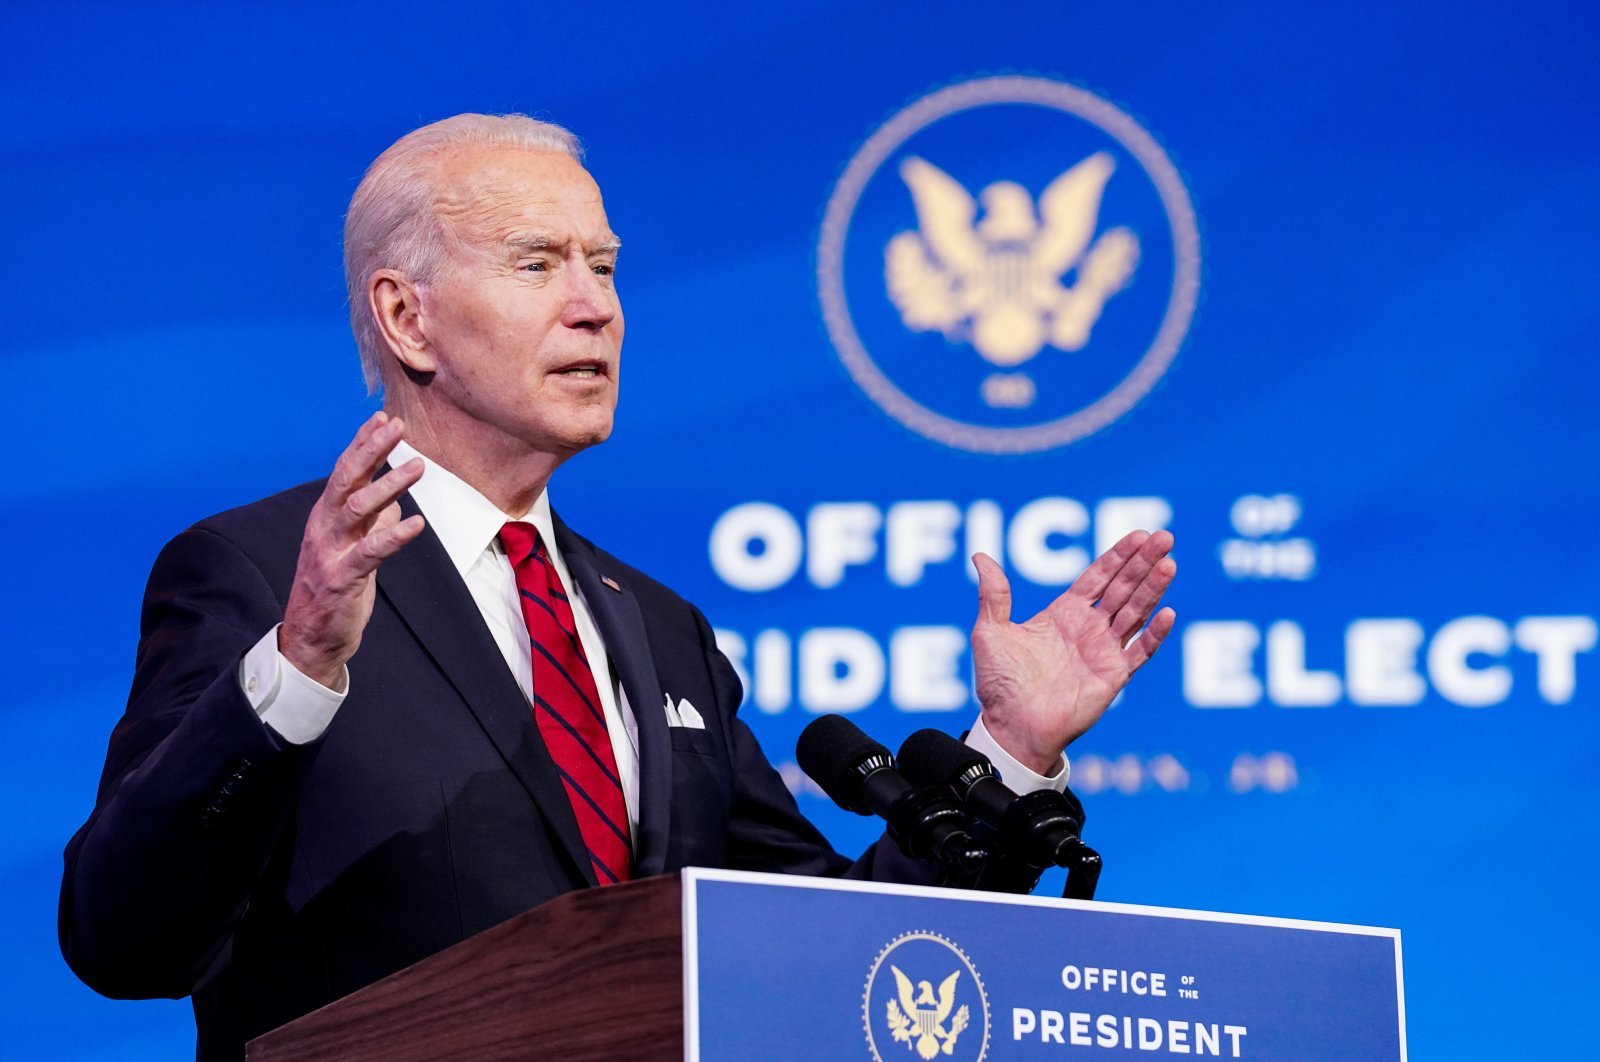 U.S. President-elect Joe Biden speaks about his plan to administer coronavirus disease vaccines to the U.S. population during a news conference at Biden's transition headquarters in Wilmington, Delaware, U.S., Jan. 15, 2021. (Reuters Photo)